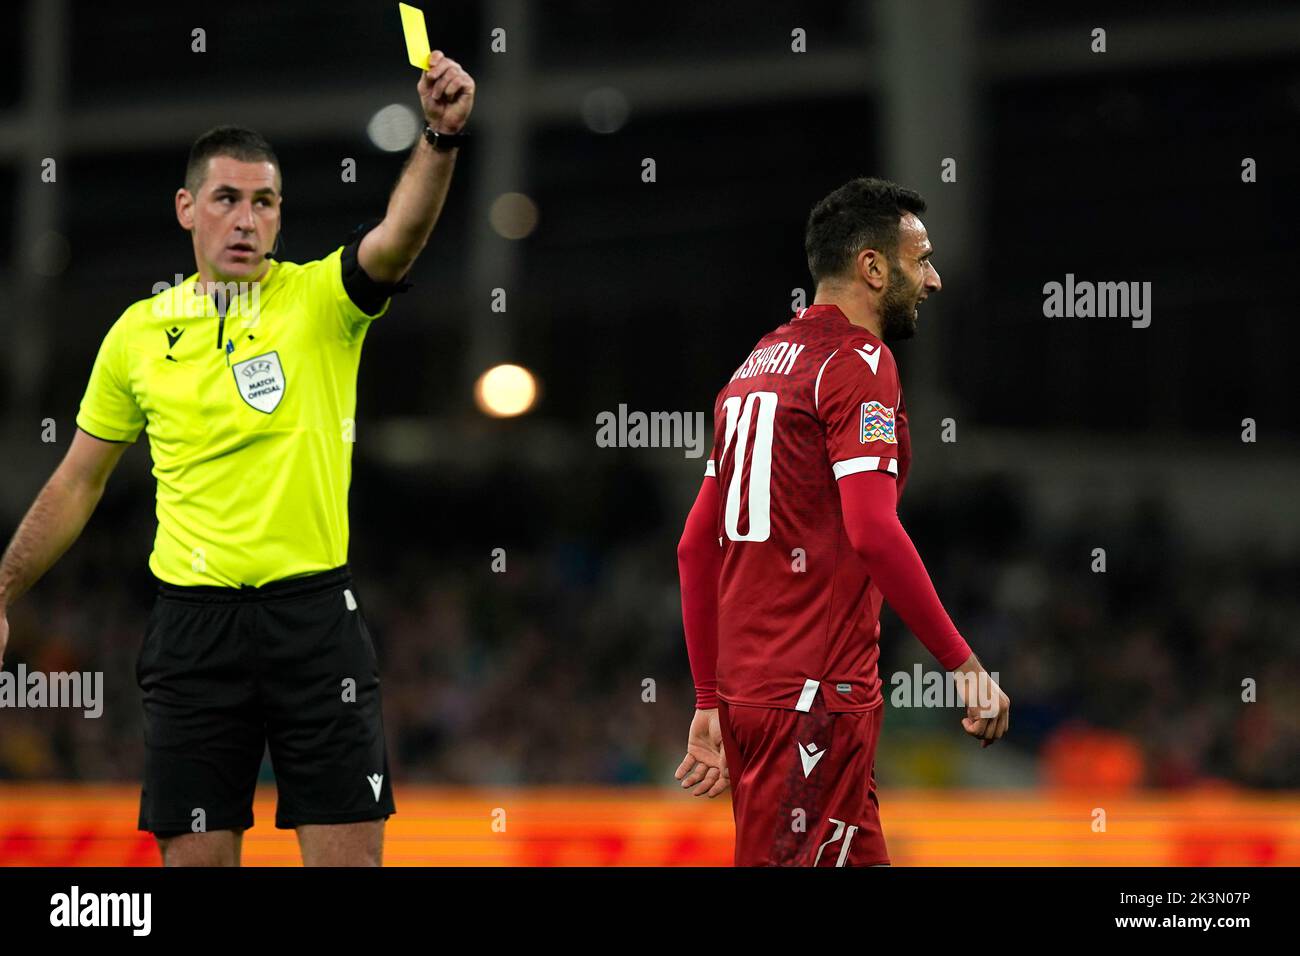 Armenia's Artak Dashyan (right) is shown a yellow card by referee Rade Obrenovie during the UEFA Nations League match at the Aviva Stadium in Dublin, Ireland. Picture date: Tuesday September 27, 2022. Stock Photo